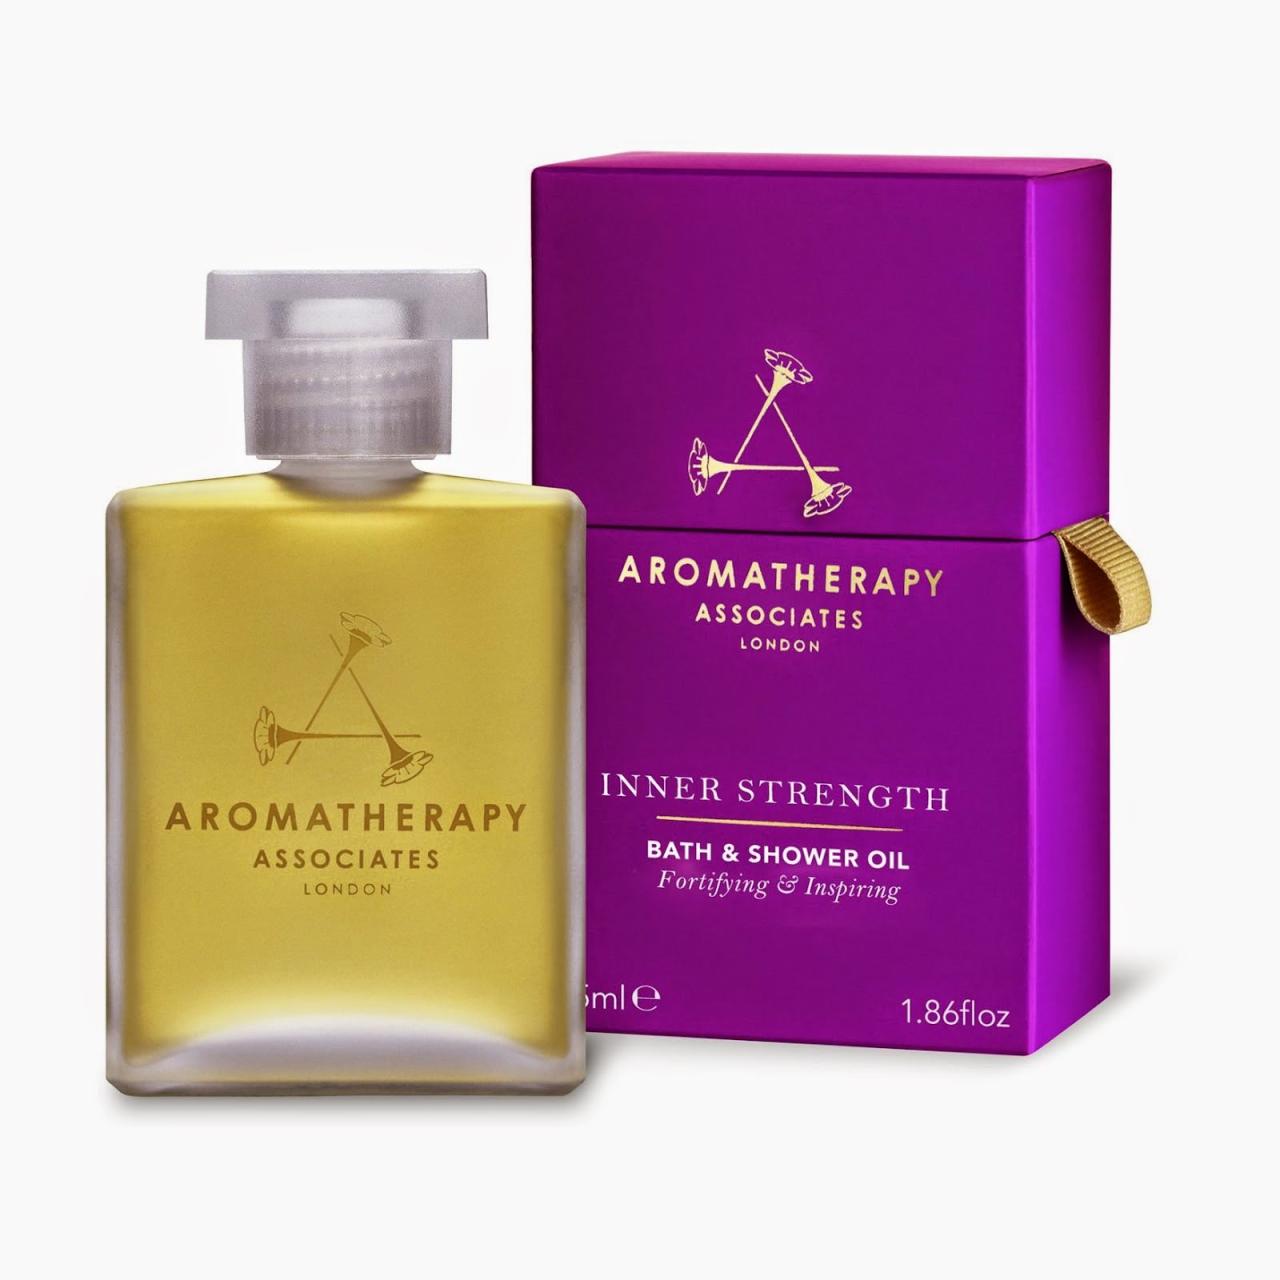 Aromatherapy associates london roses coming everything surrounded luscious aroma wanted fresh ever ve need if